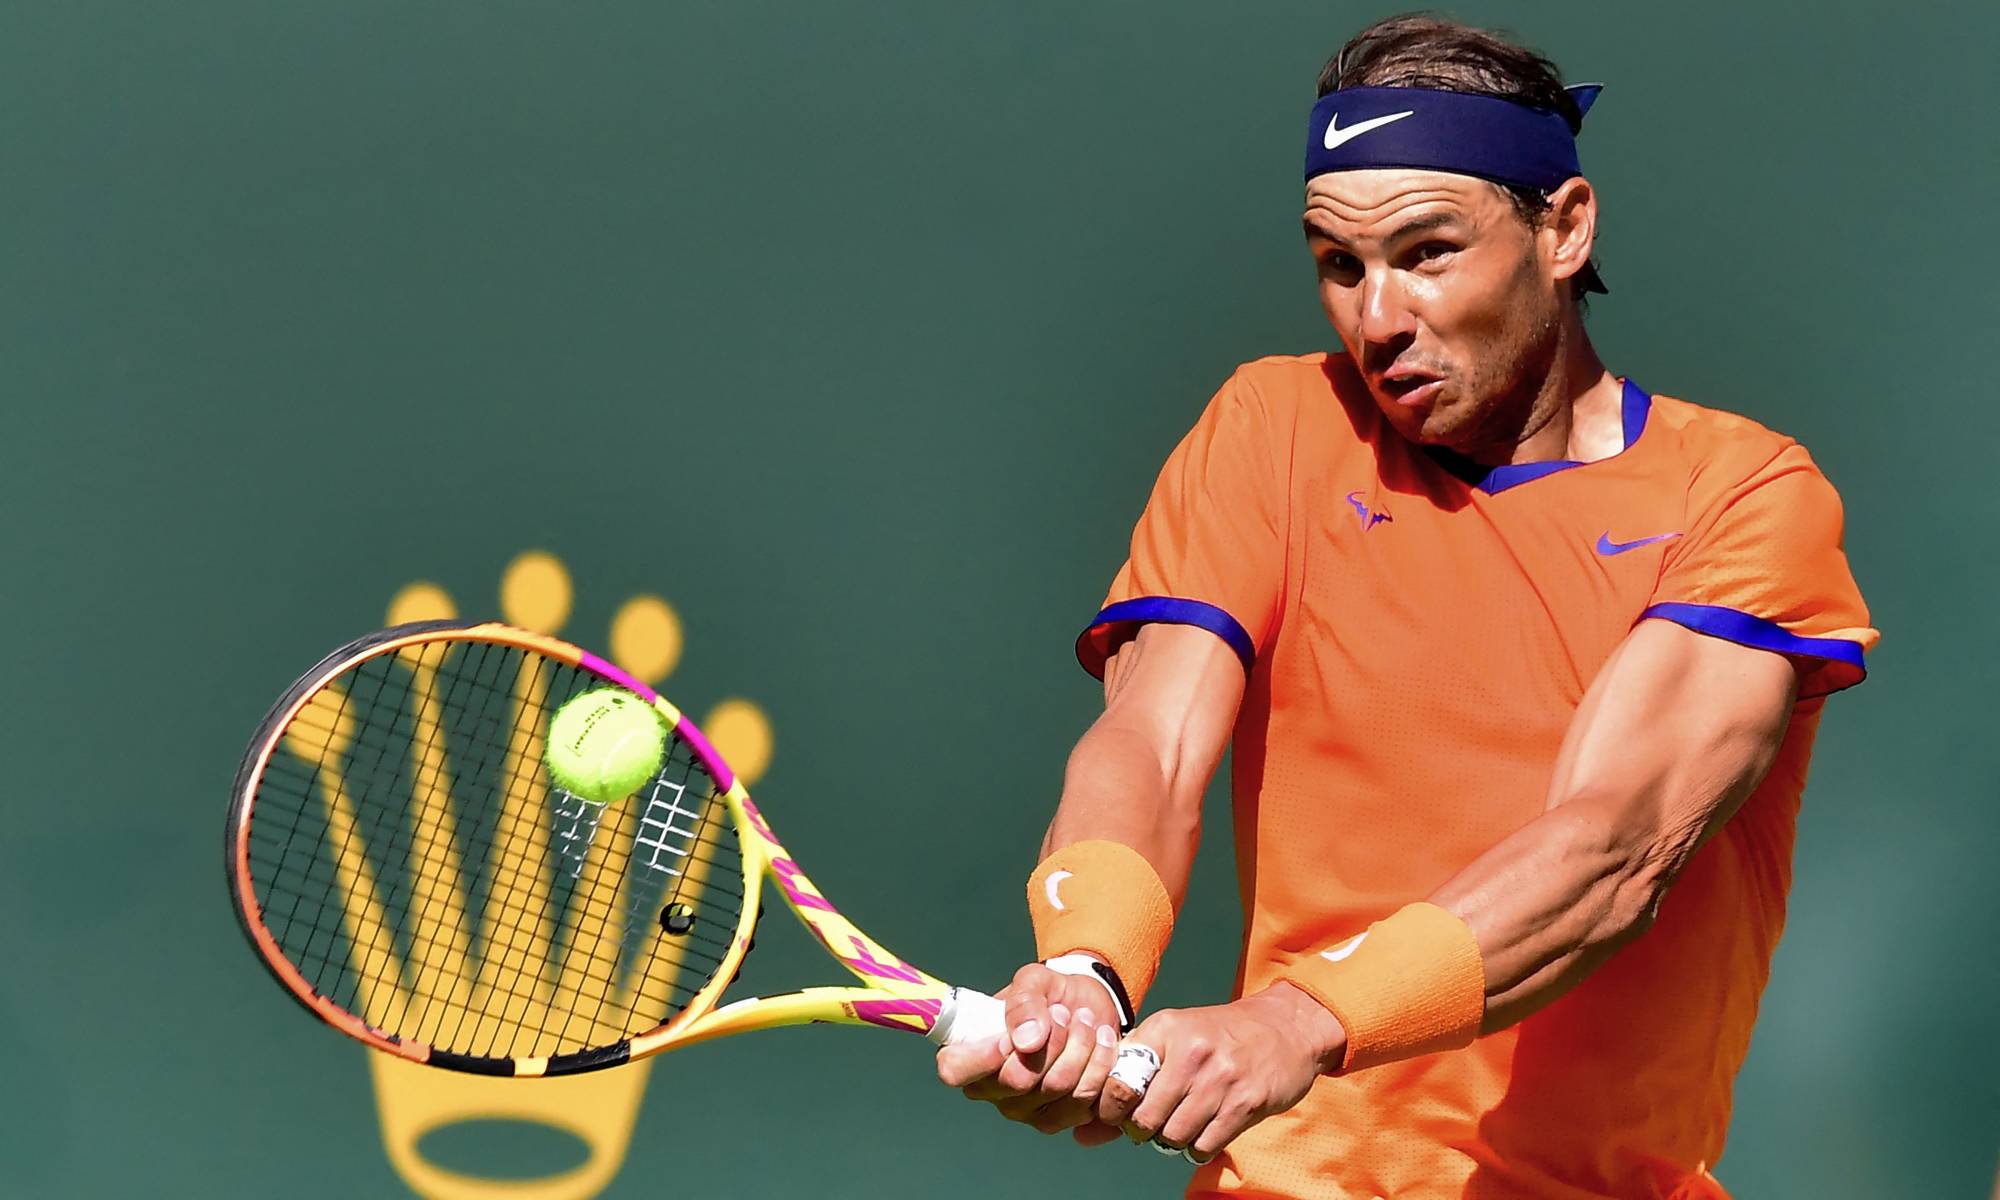 Rafa Nadal Players need to build resilience to deal with hecklers